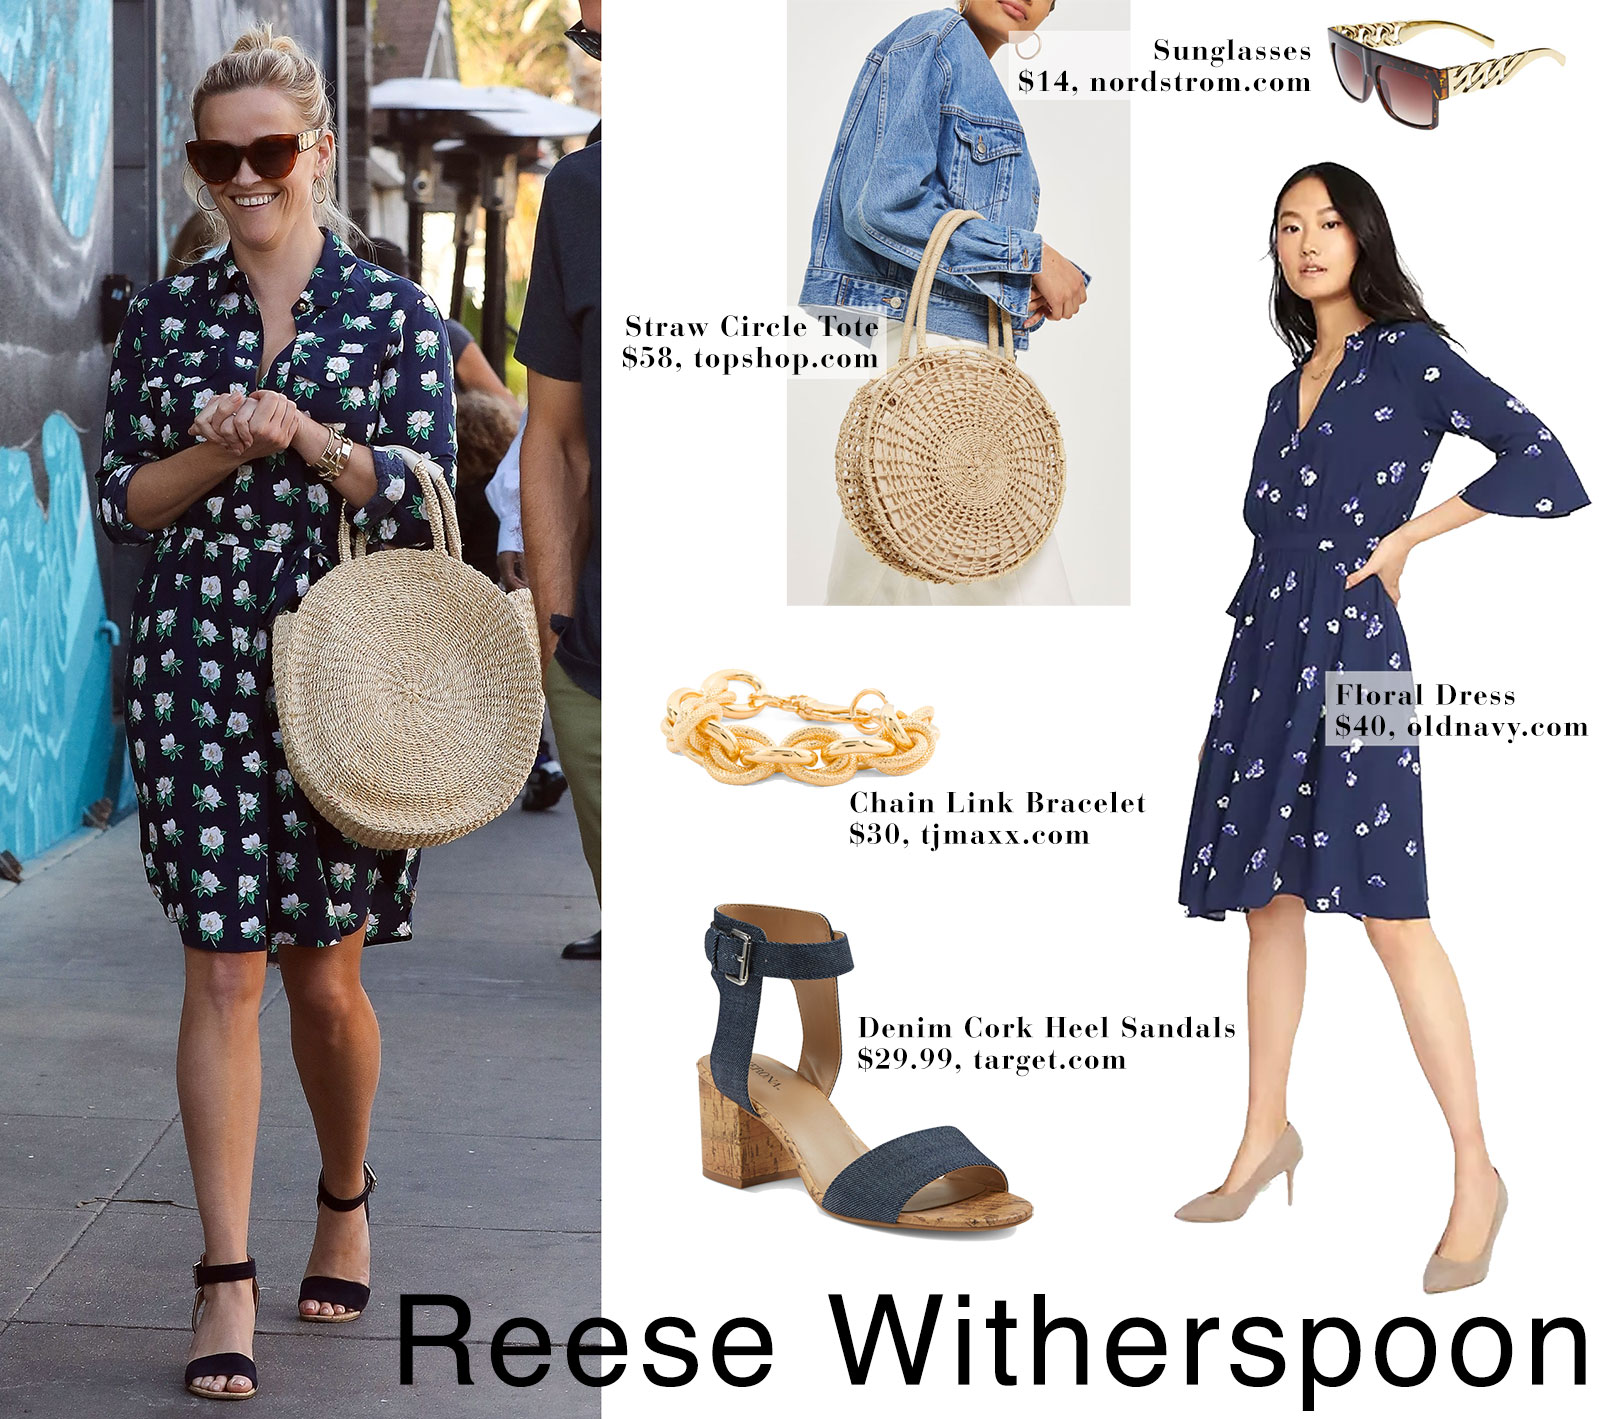 Reese Witherspoon's floral shirtdress and straw circle tote bag look for less